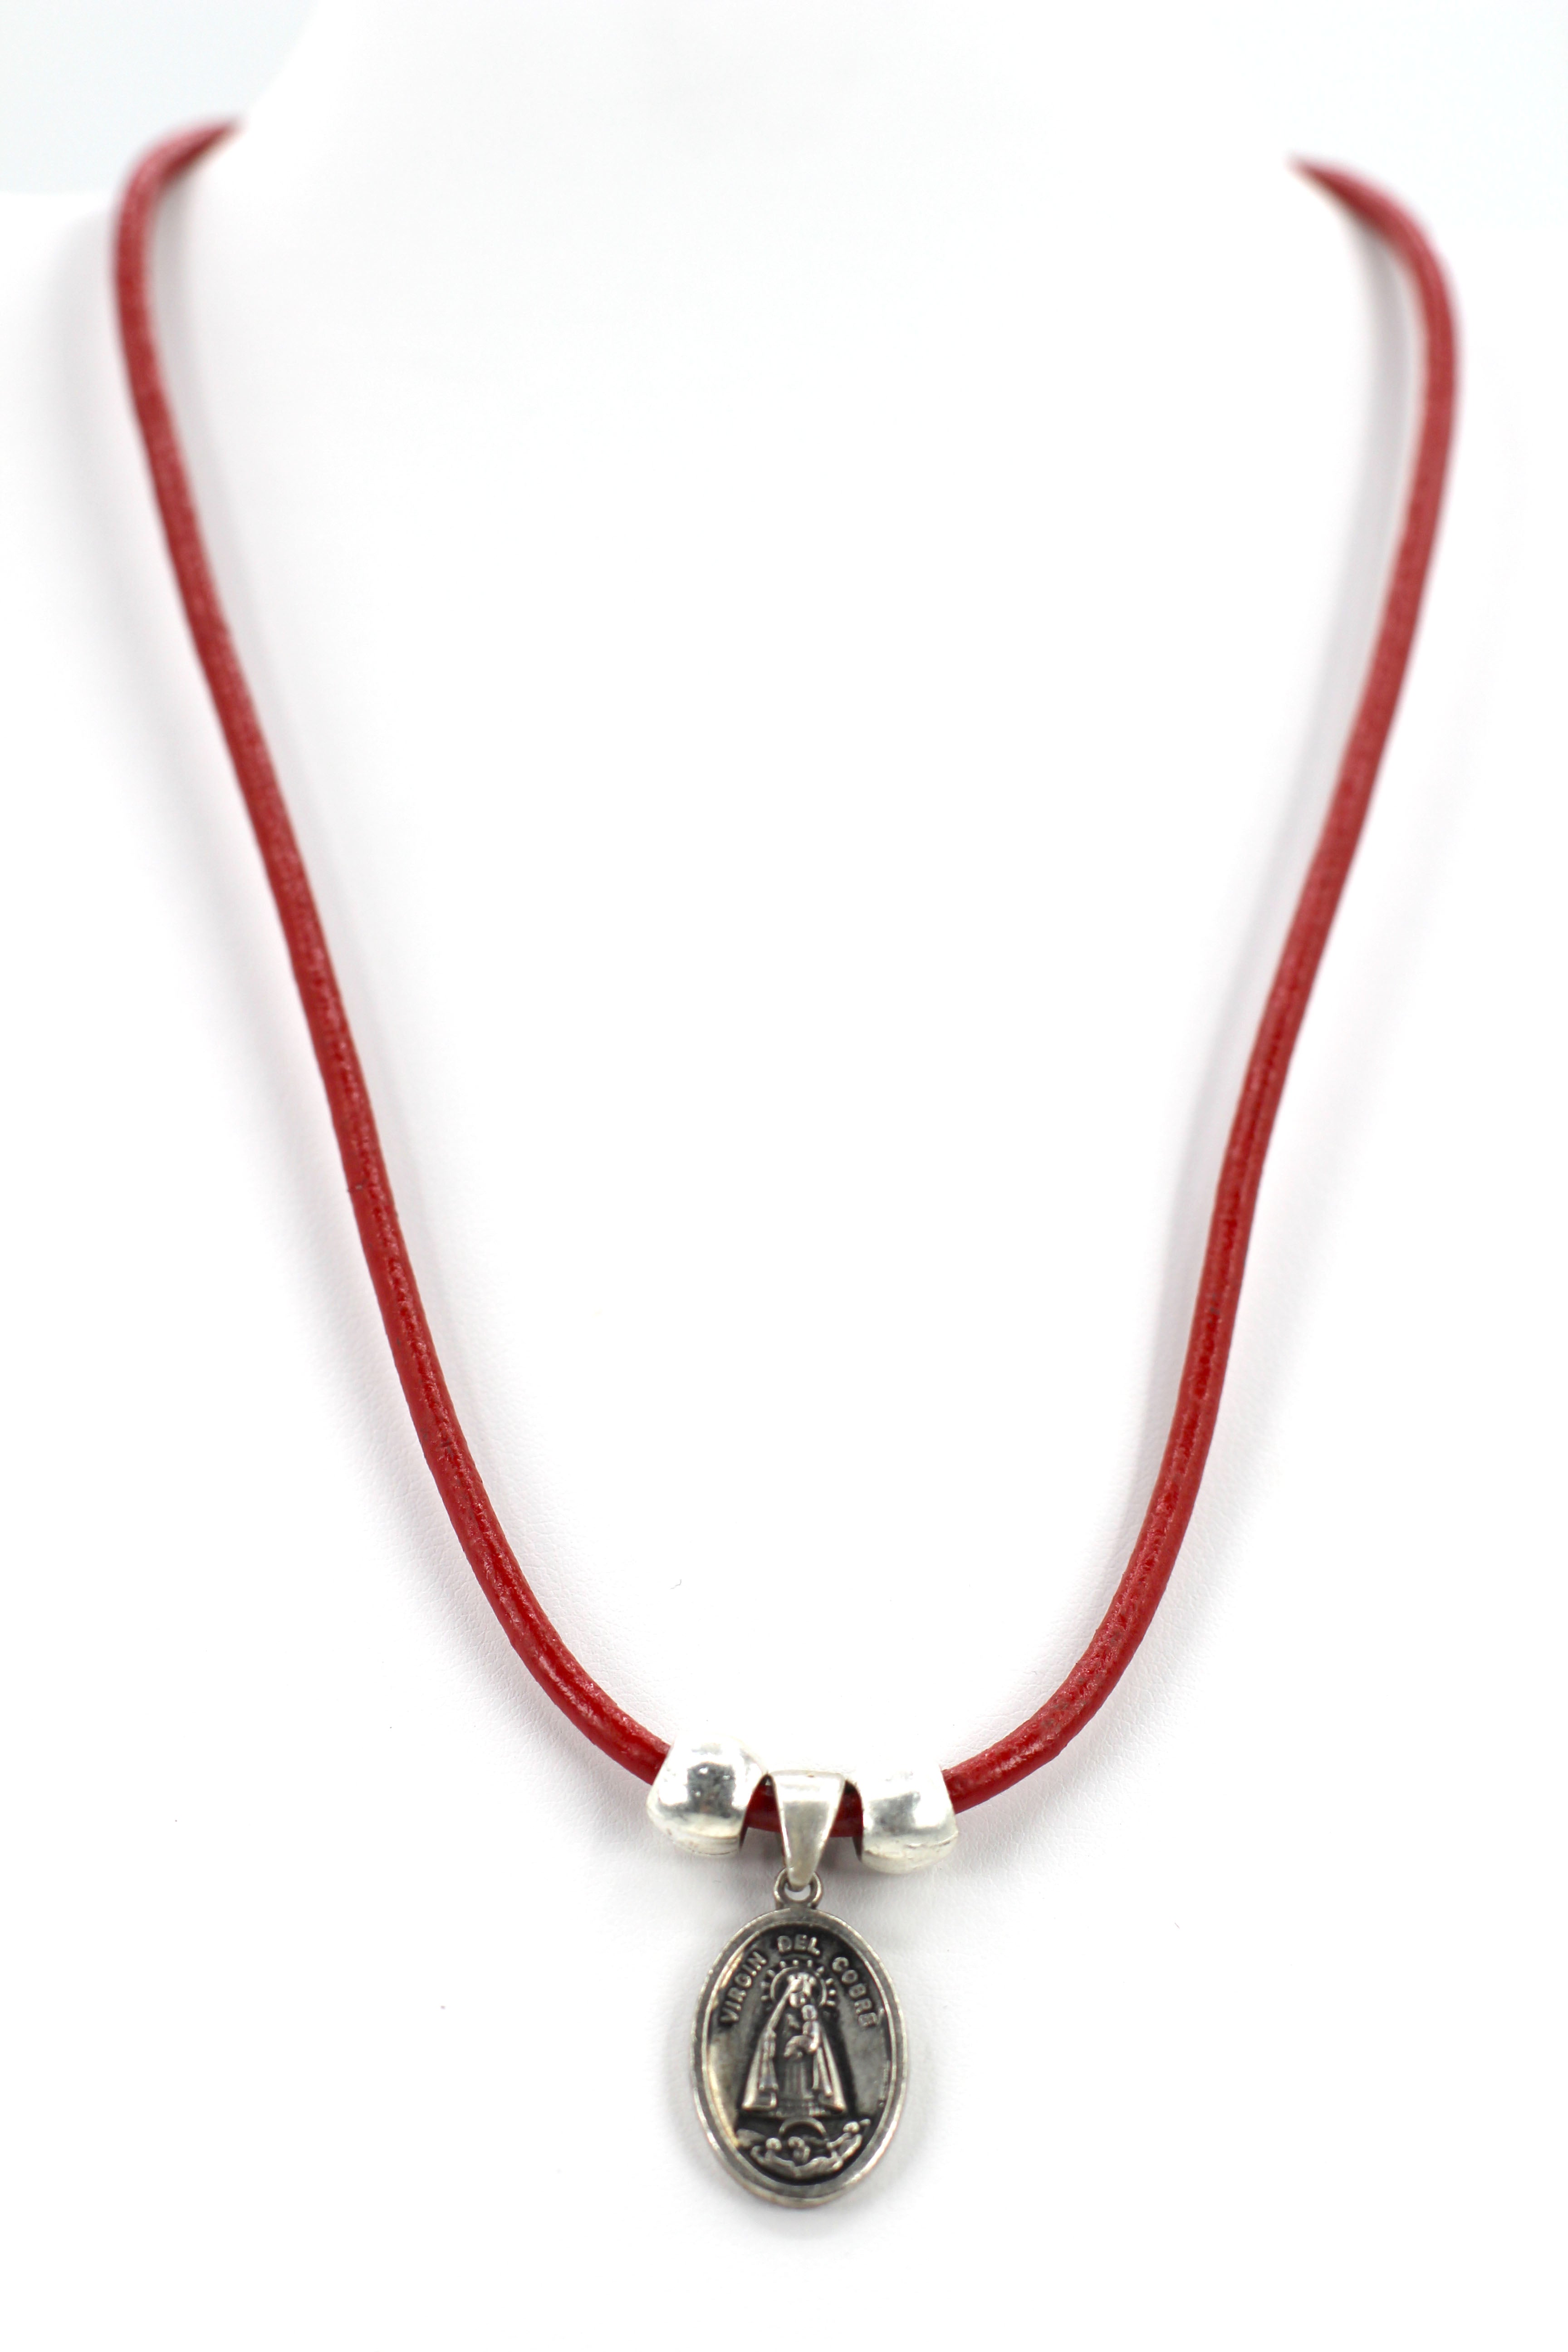 Vintage Necklace of La Caridad Del Cobre - Our Lady Of Charity Jewelry with Genuine Leather strap by Graciela's Collection